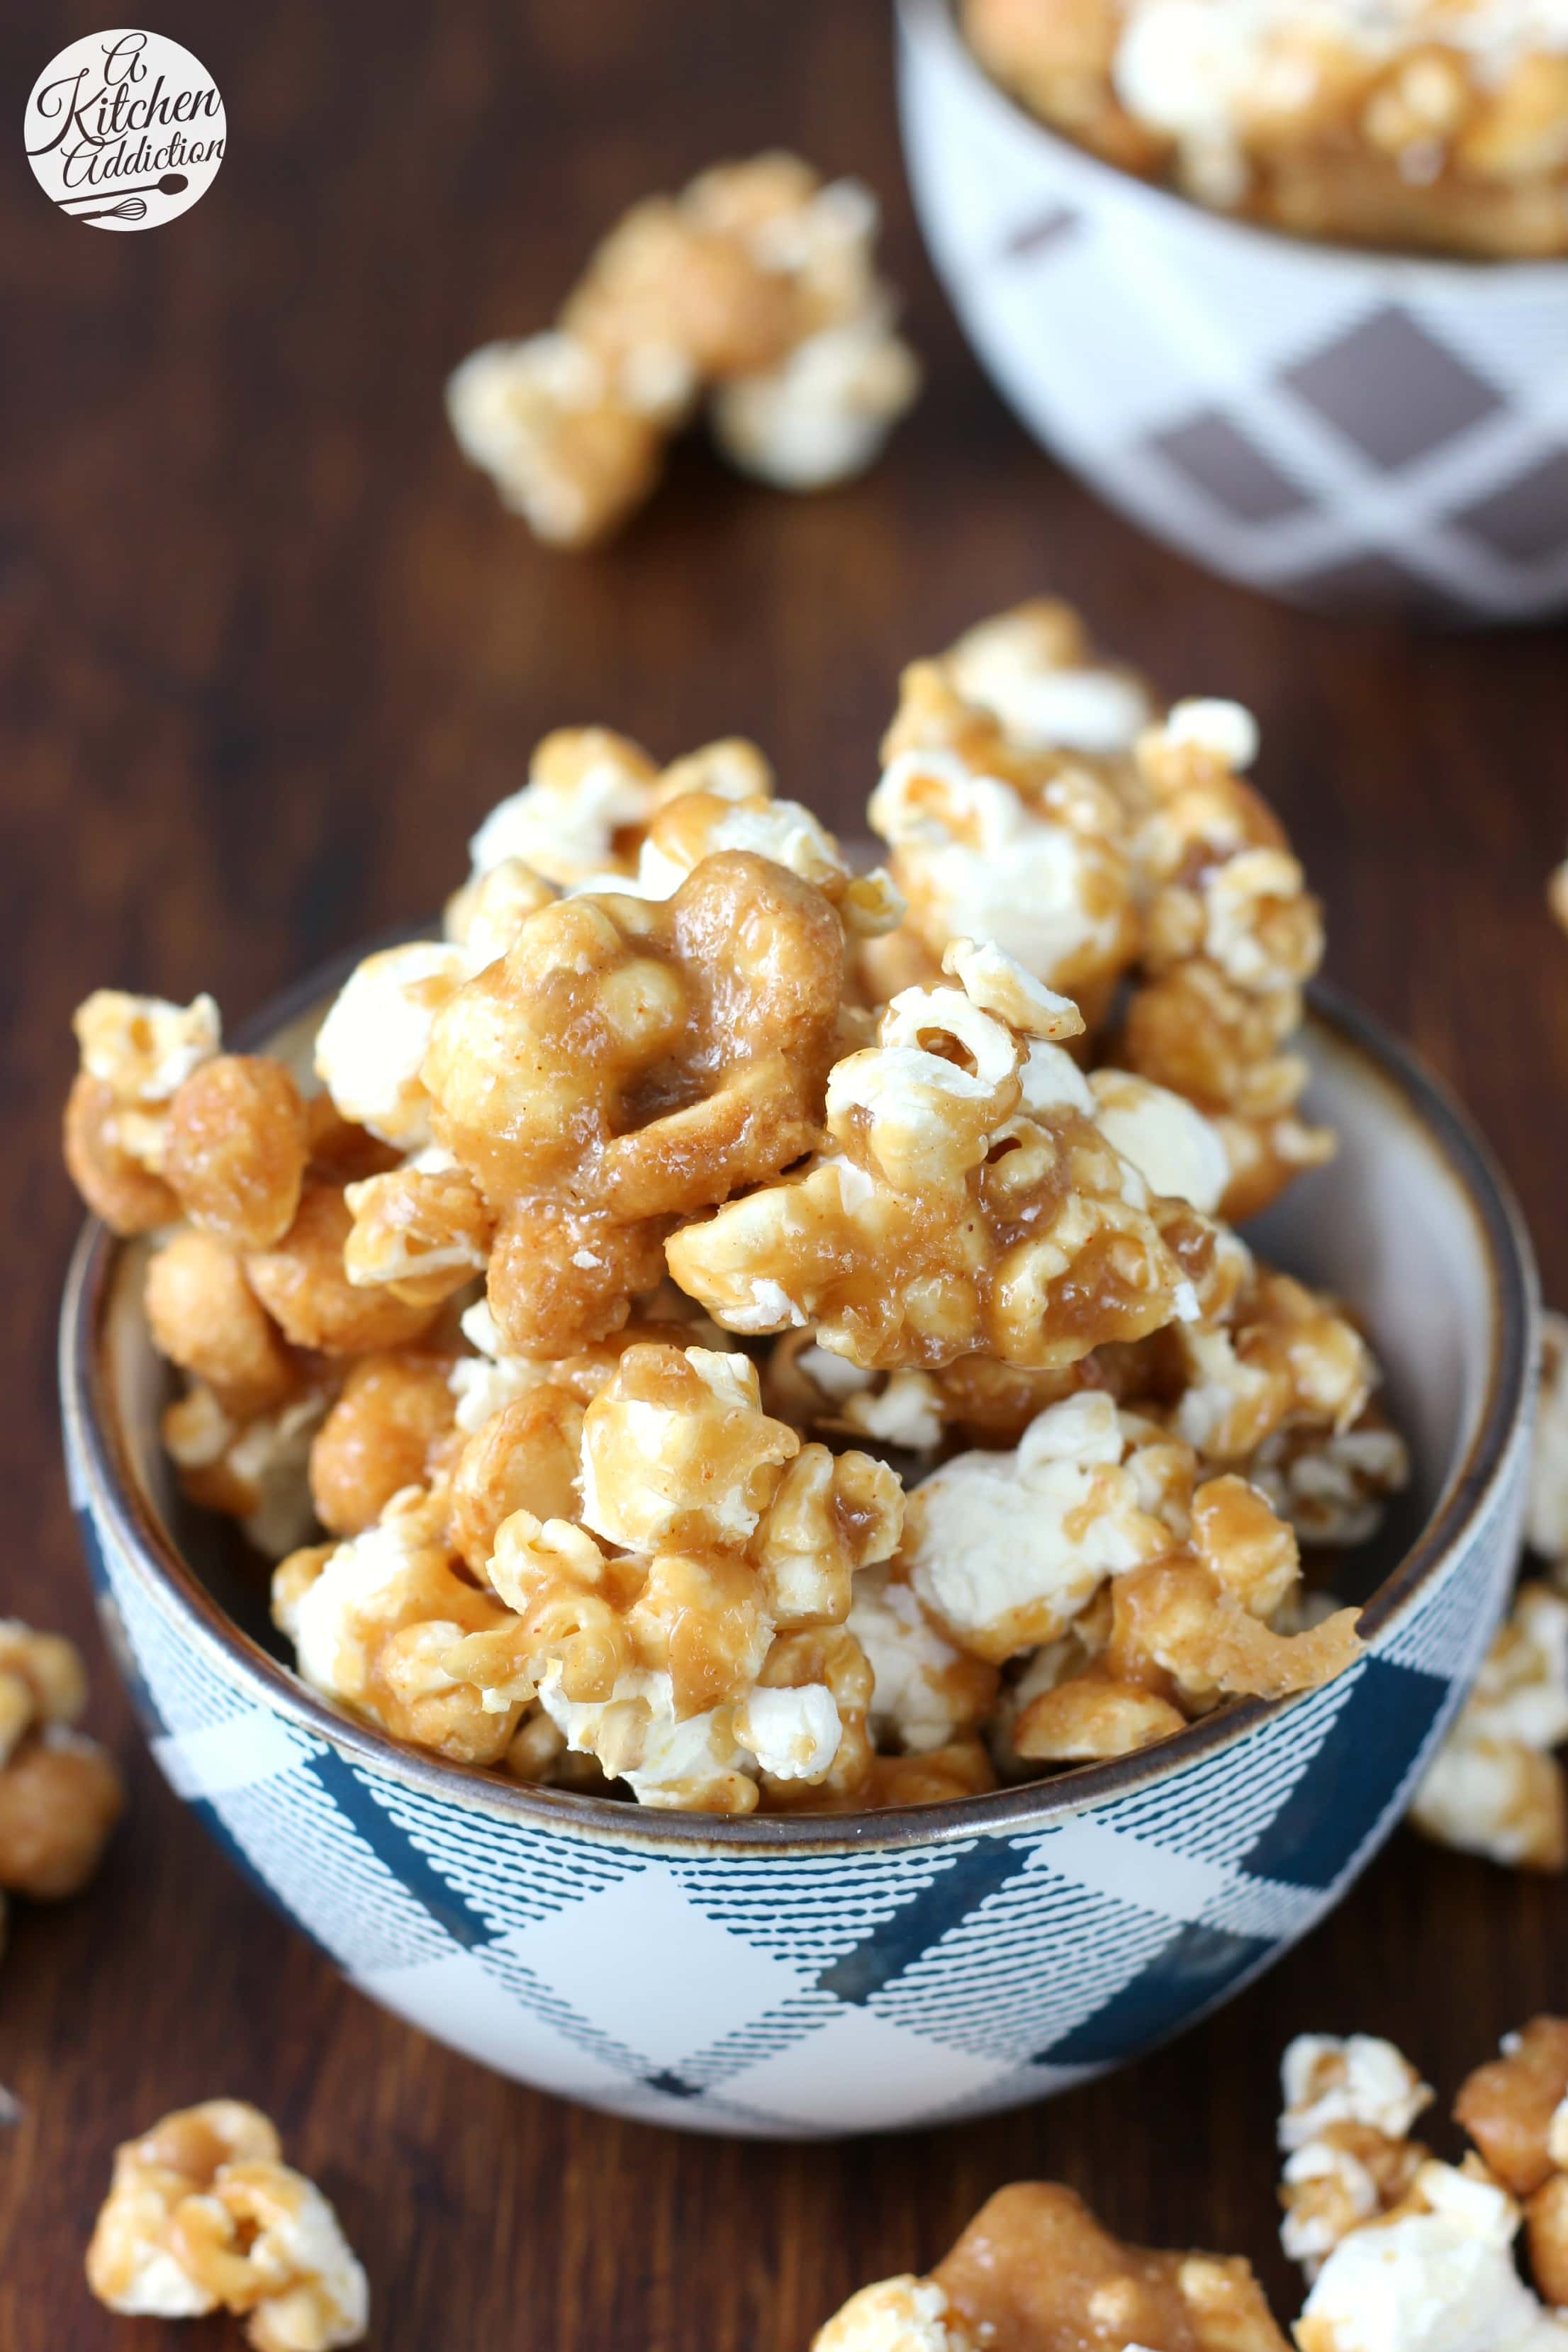 How to make Caramel Popcorn at home - Cloudy Kitchen